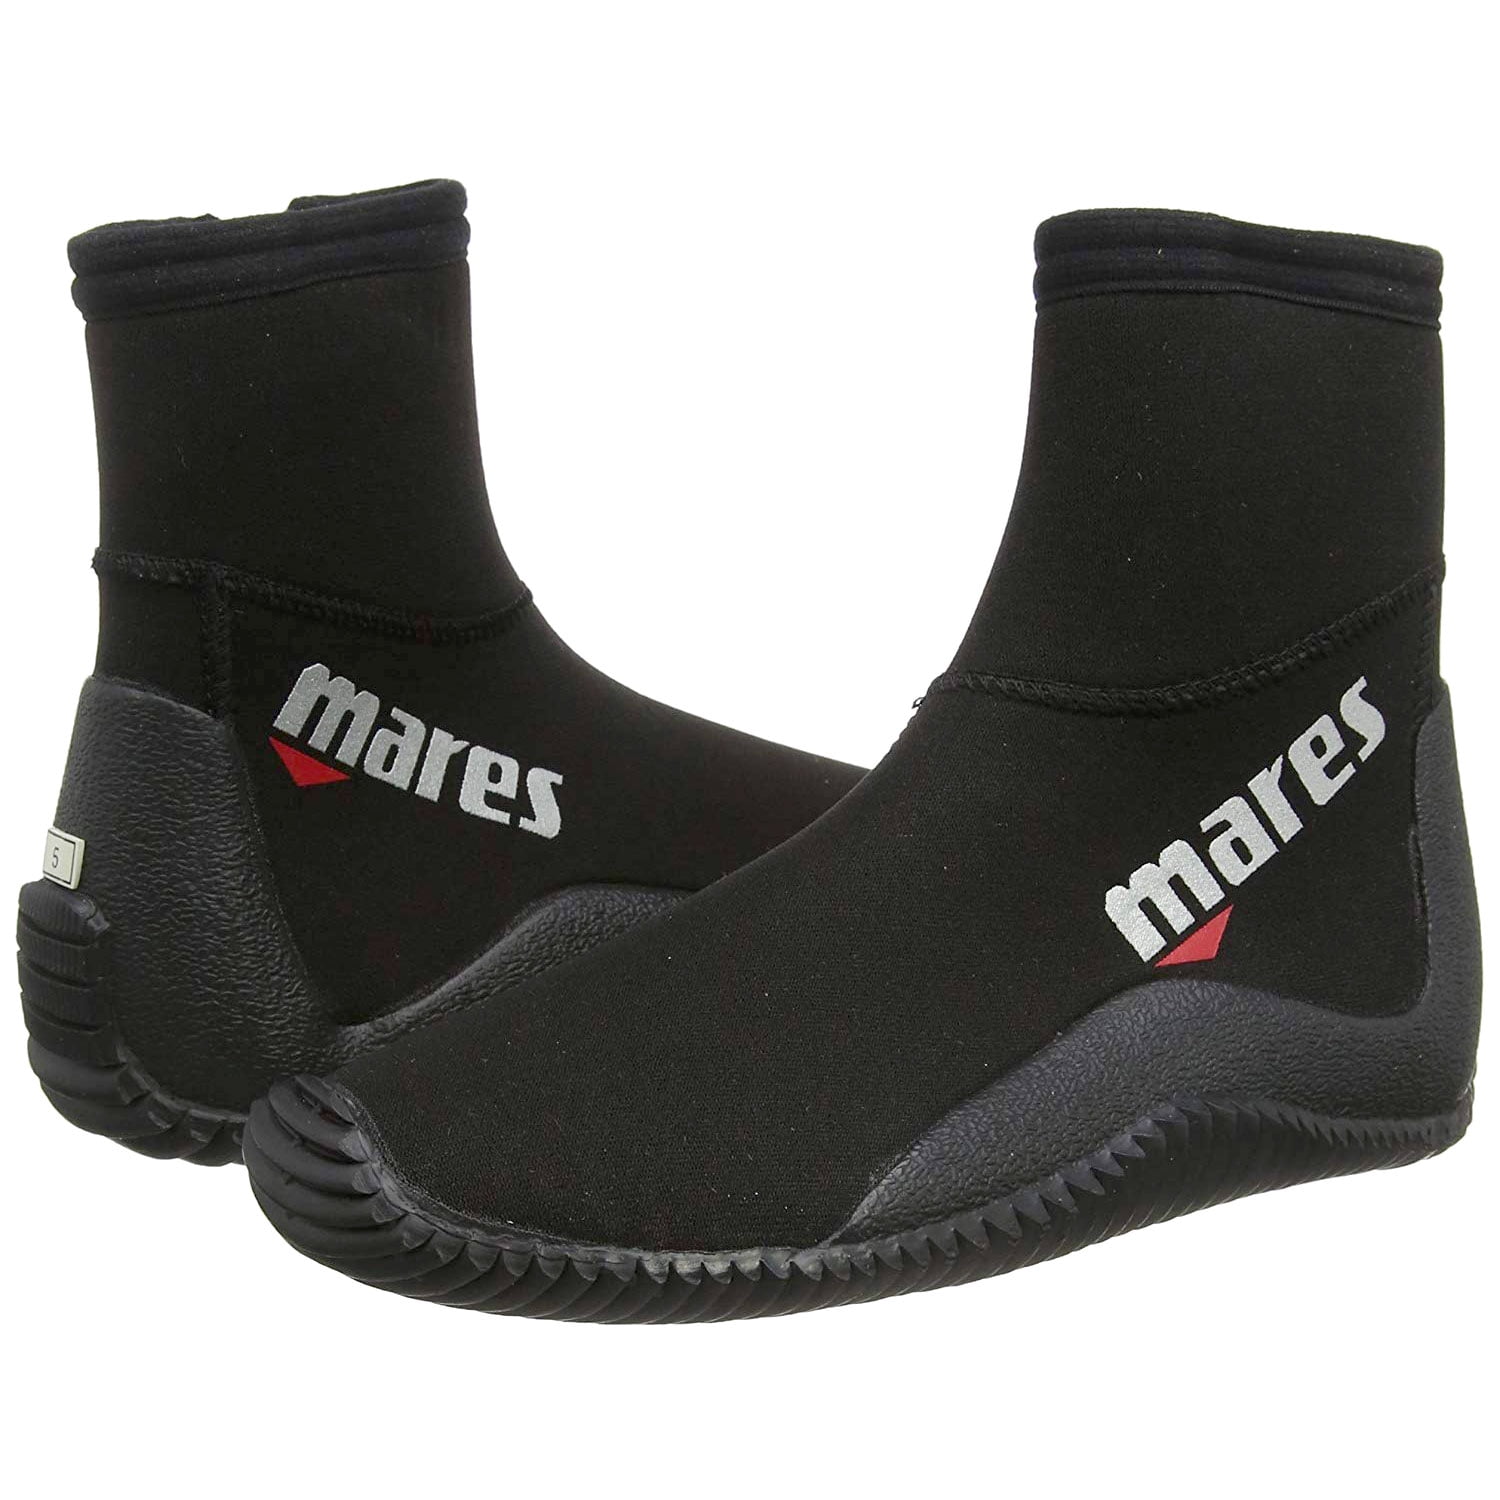 IST Sports 5mm Dive Boot with Sole mens sizes 8 10 